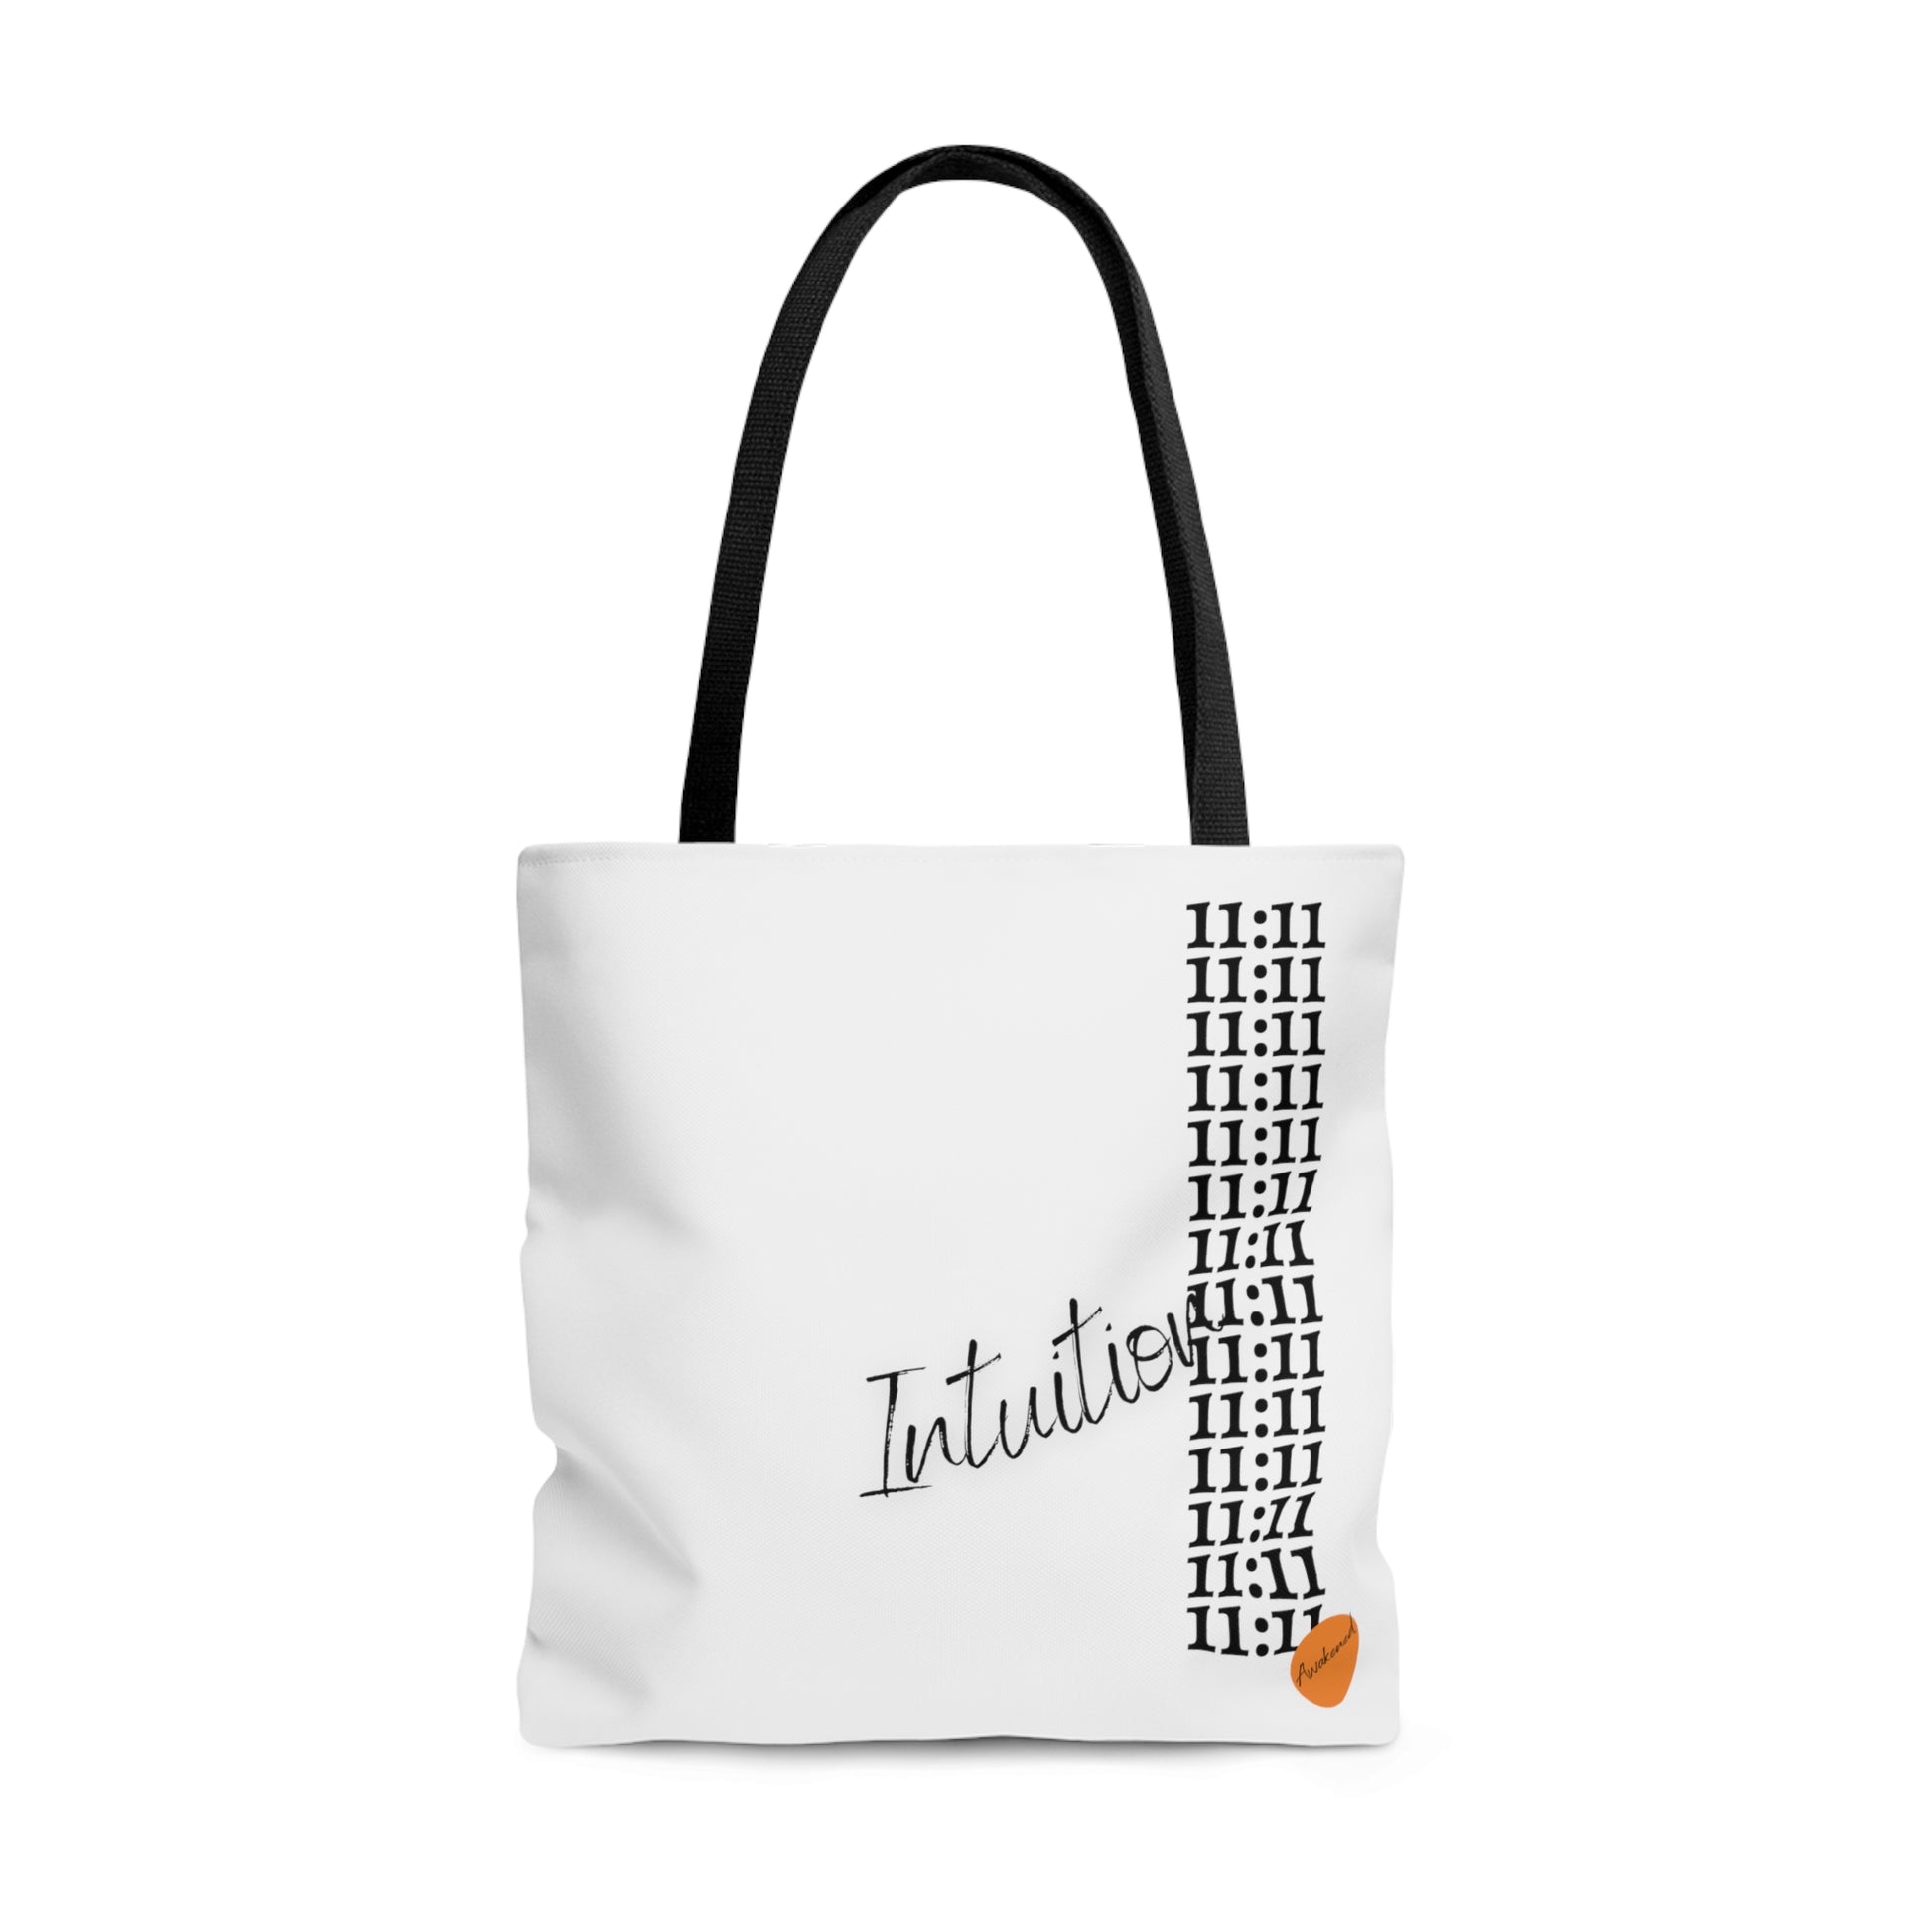 White tote bag with angel number 1111 and intuition print